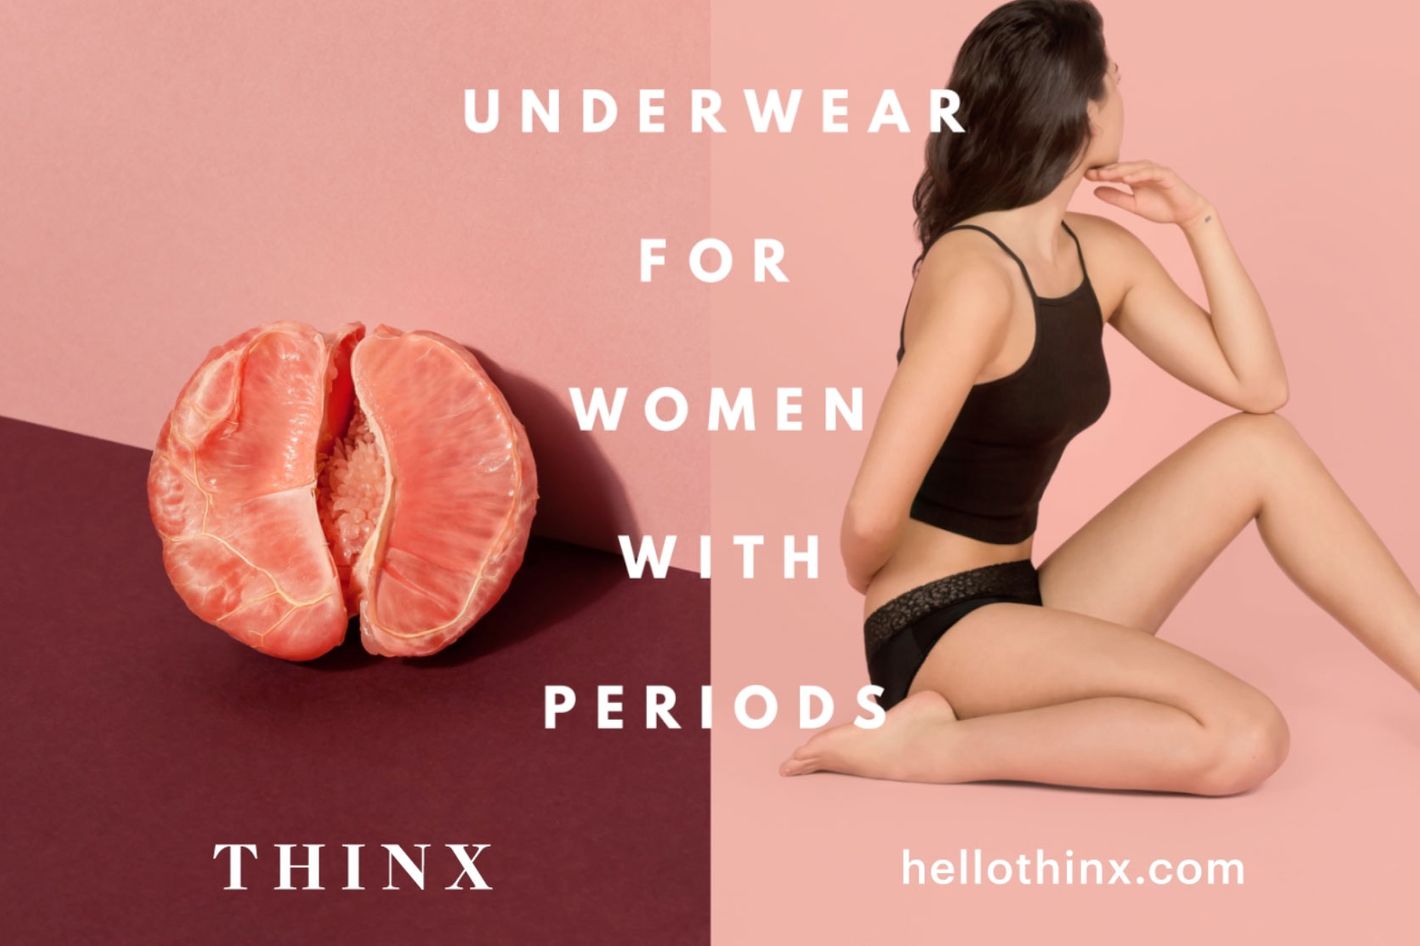 Thinx period pants advert has been deemed too 'inappropriate' too be  displayed